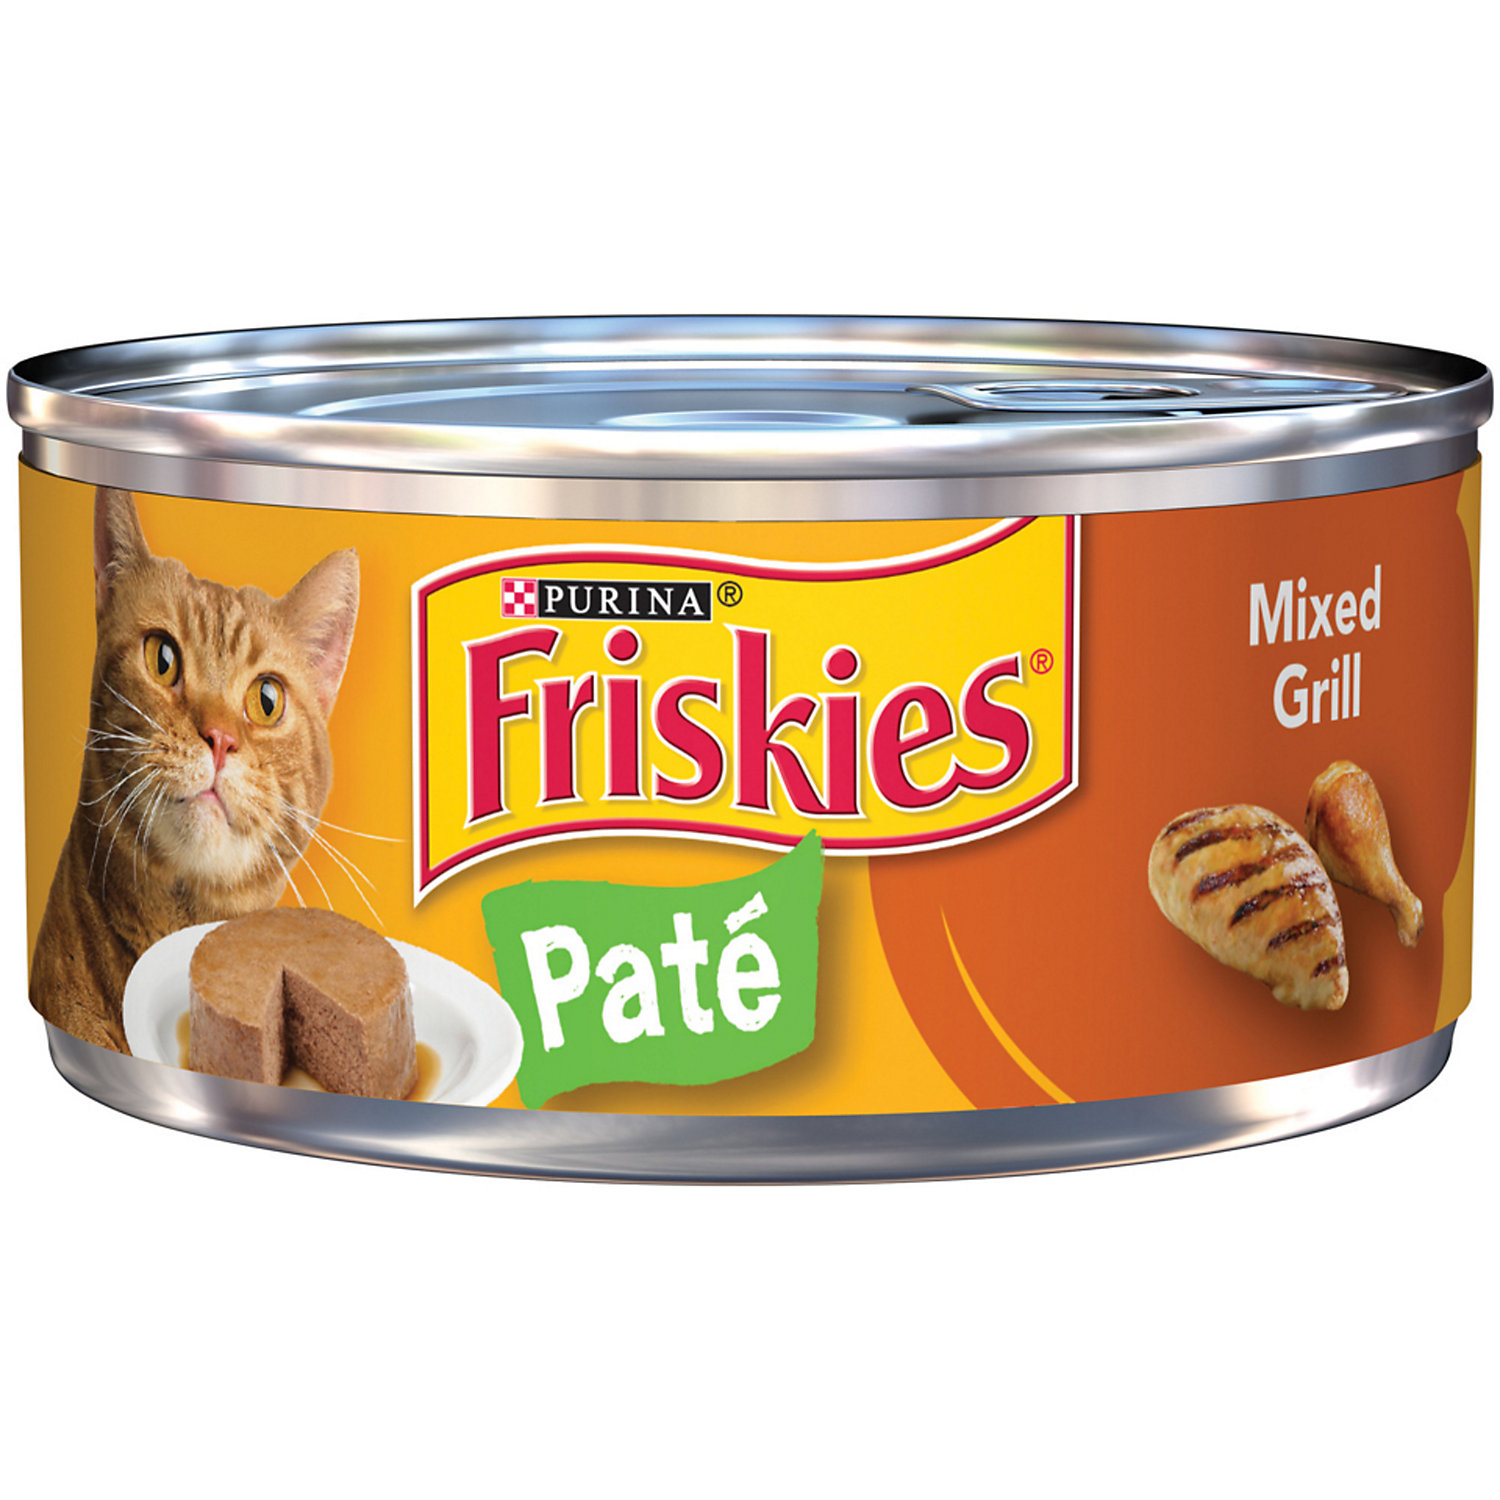 Friskies Mixed Grill Pate Canned Cat Food, Case of 24